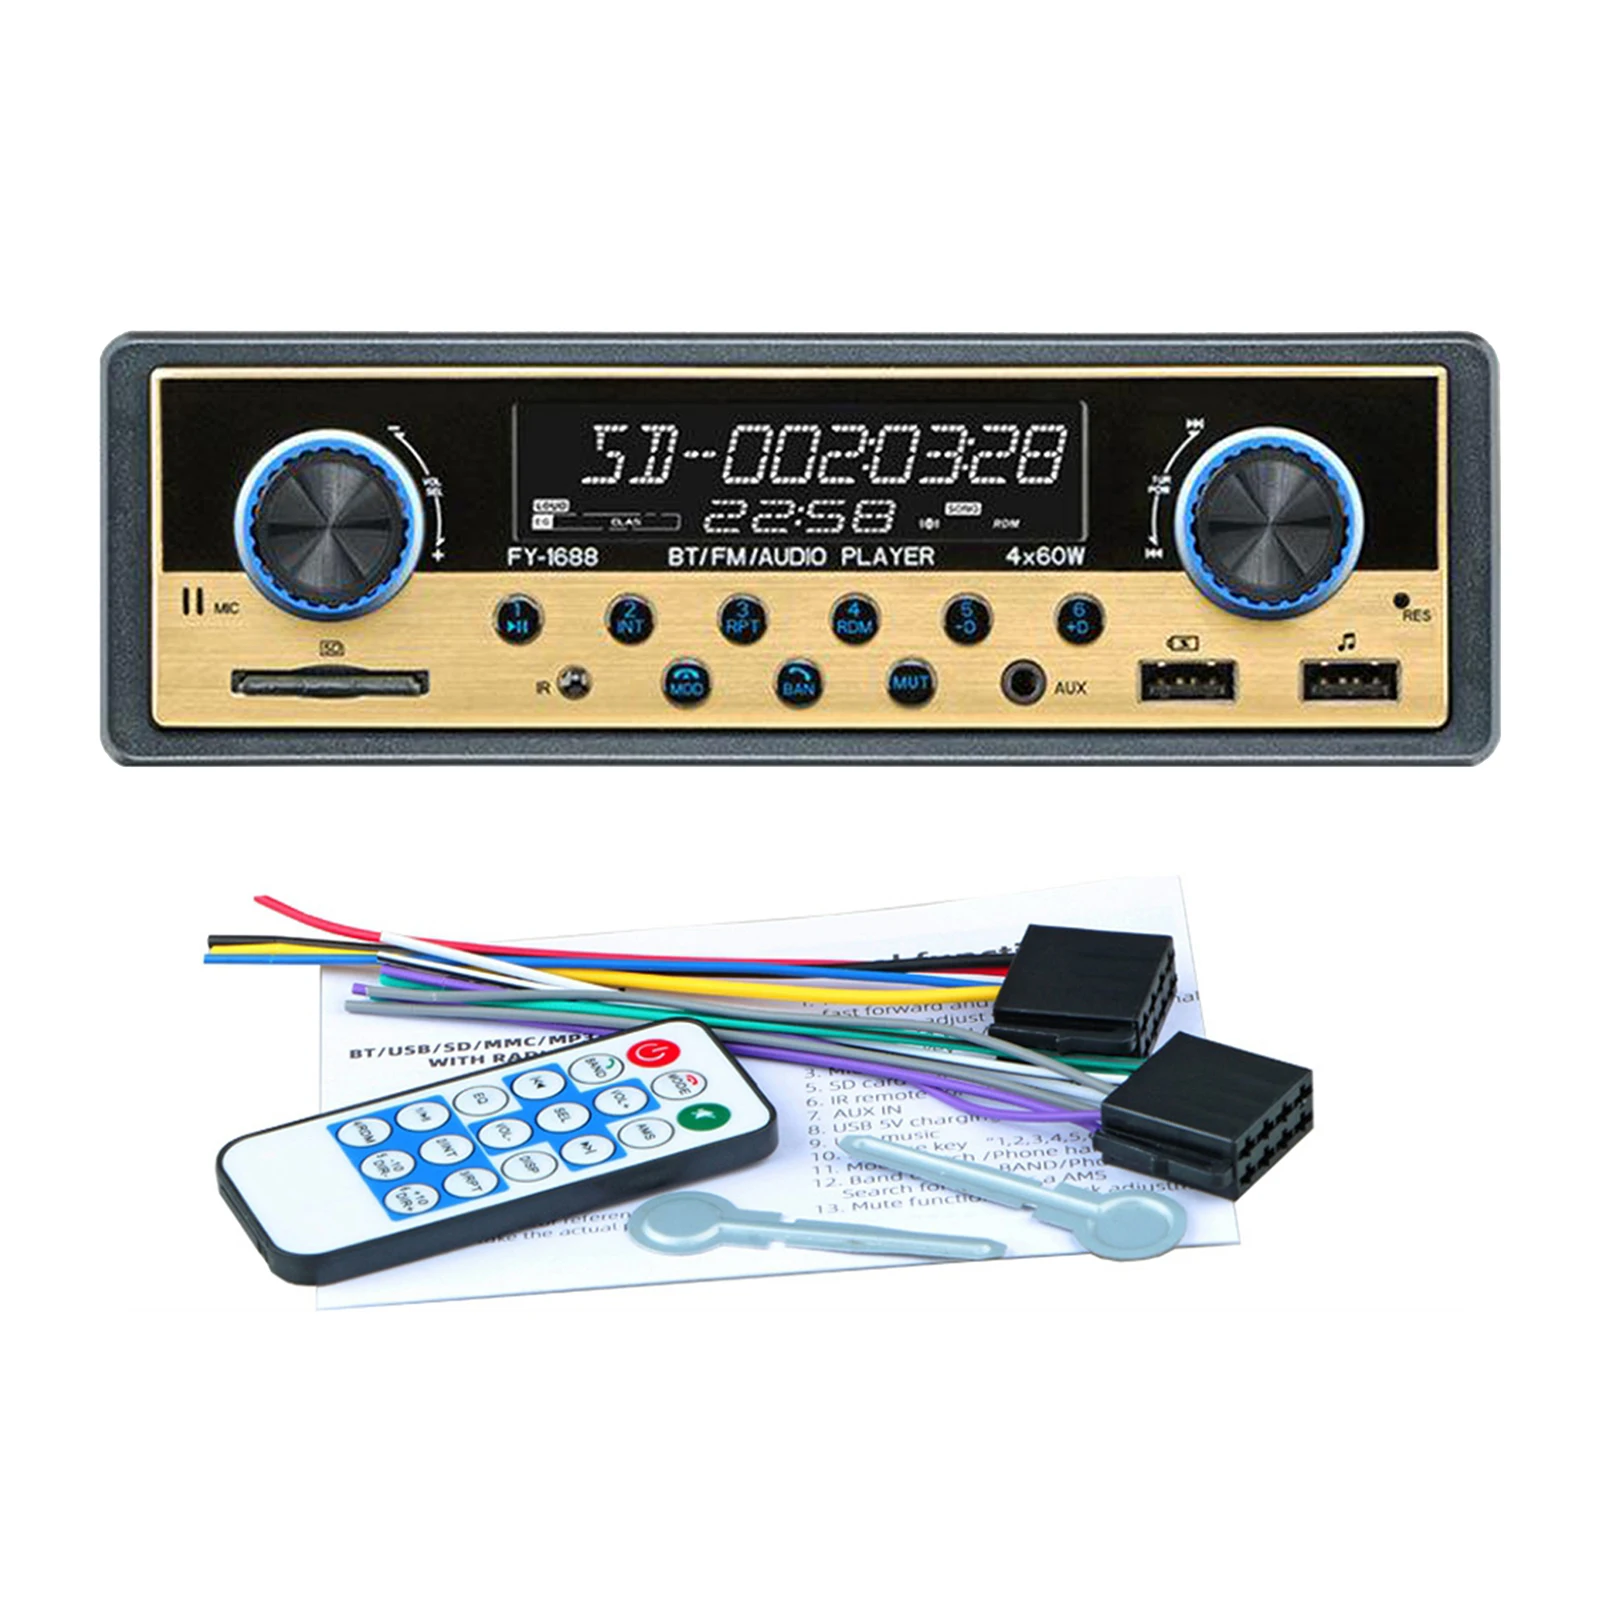 12V Audio Systems Dual USB Port Hands Free Calling LCD Monitor MP3 Player